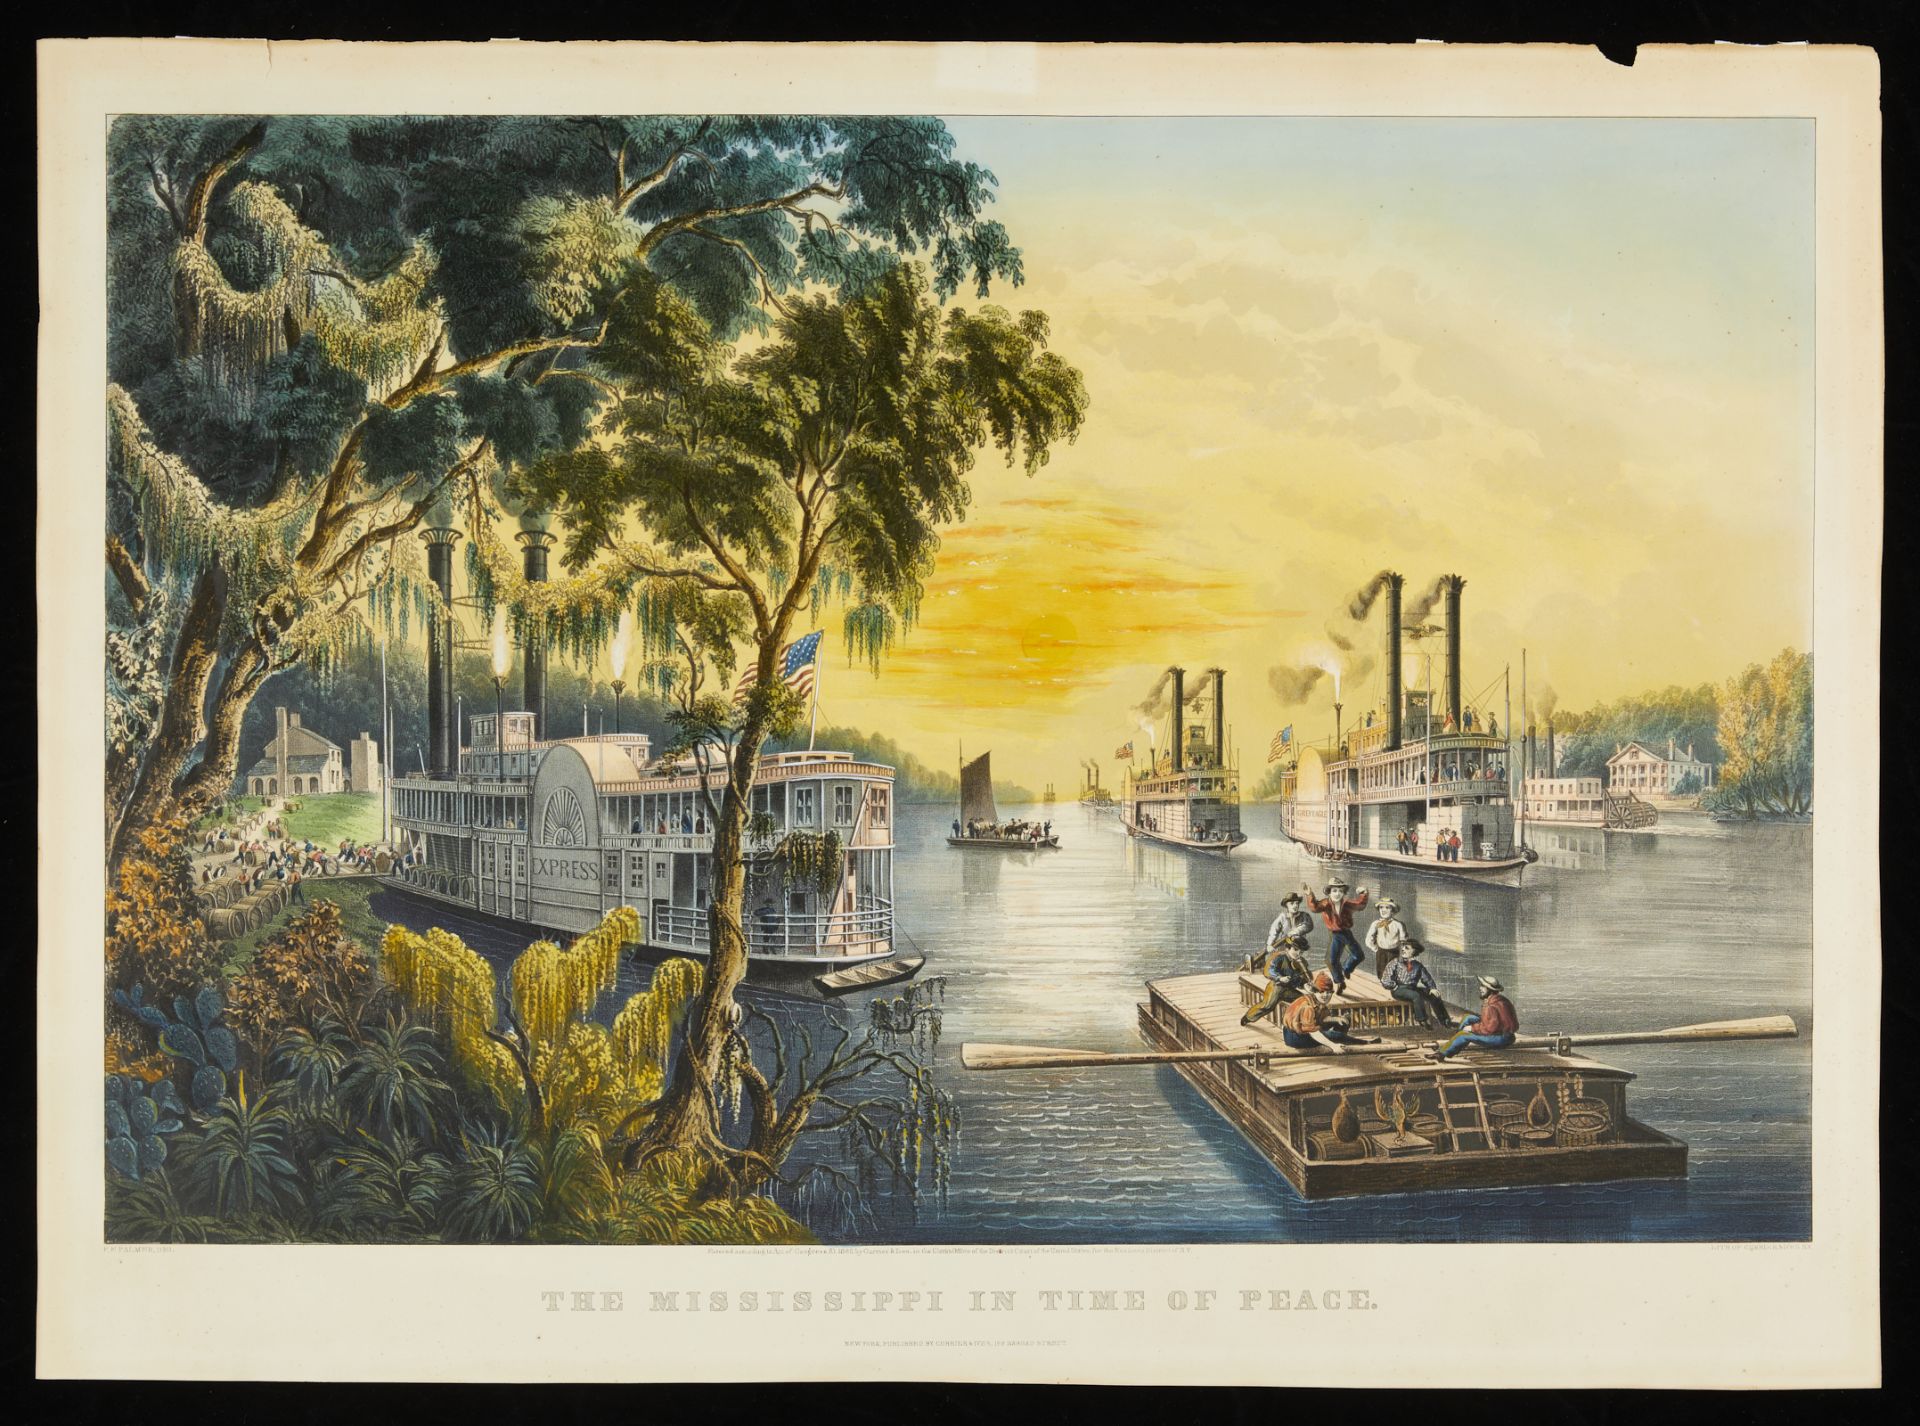 Currier & Ives "The Mississippi in Time of Peace" - Image 3 of 10